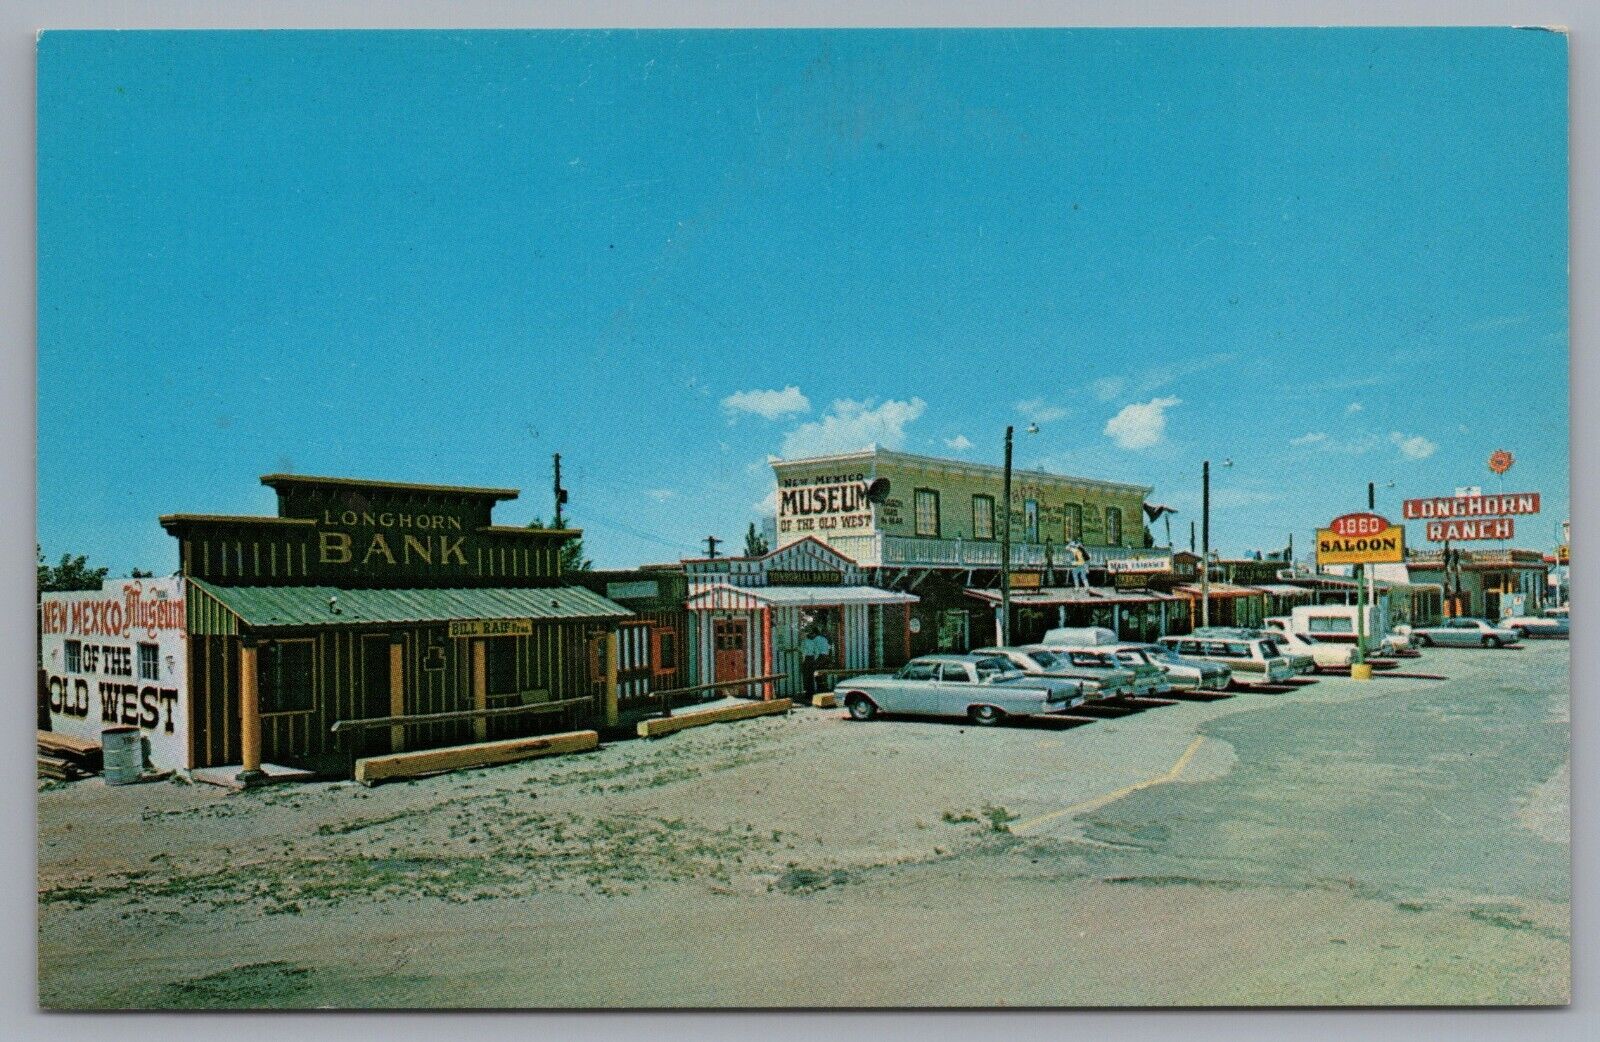 The Longhorn Ranch Museum And Ghost Town Old West Route 66 Postcard